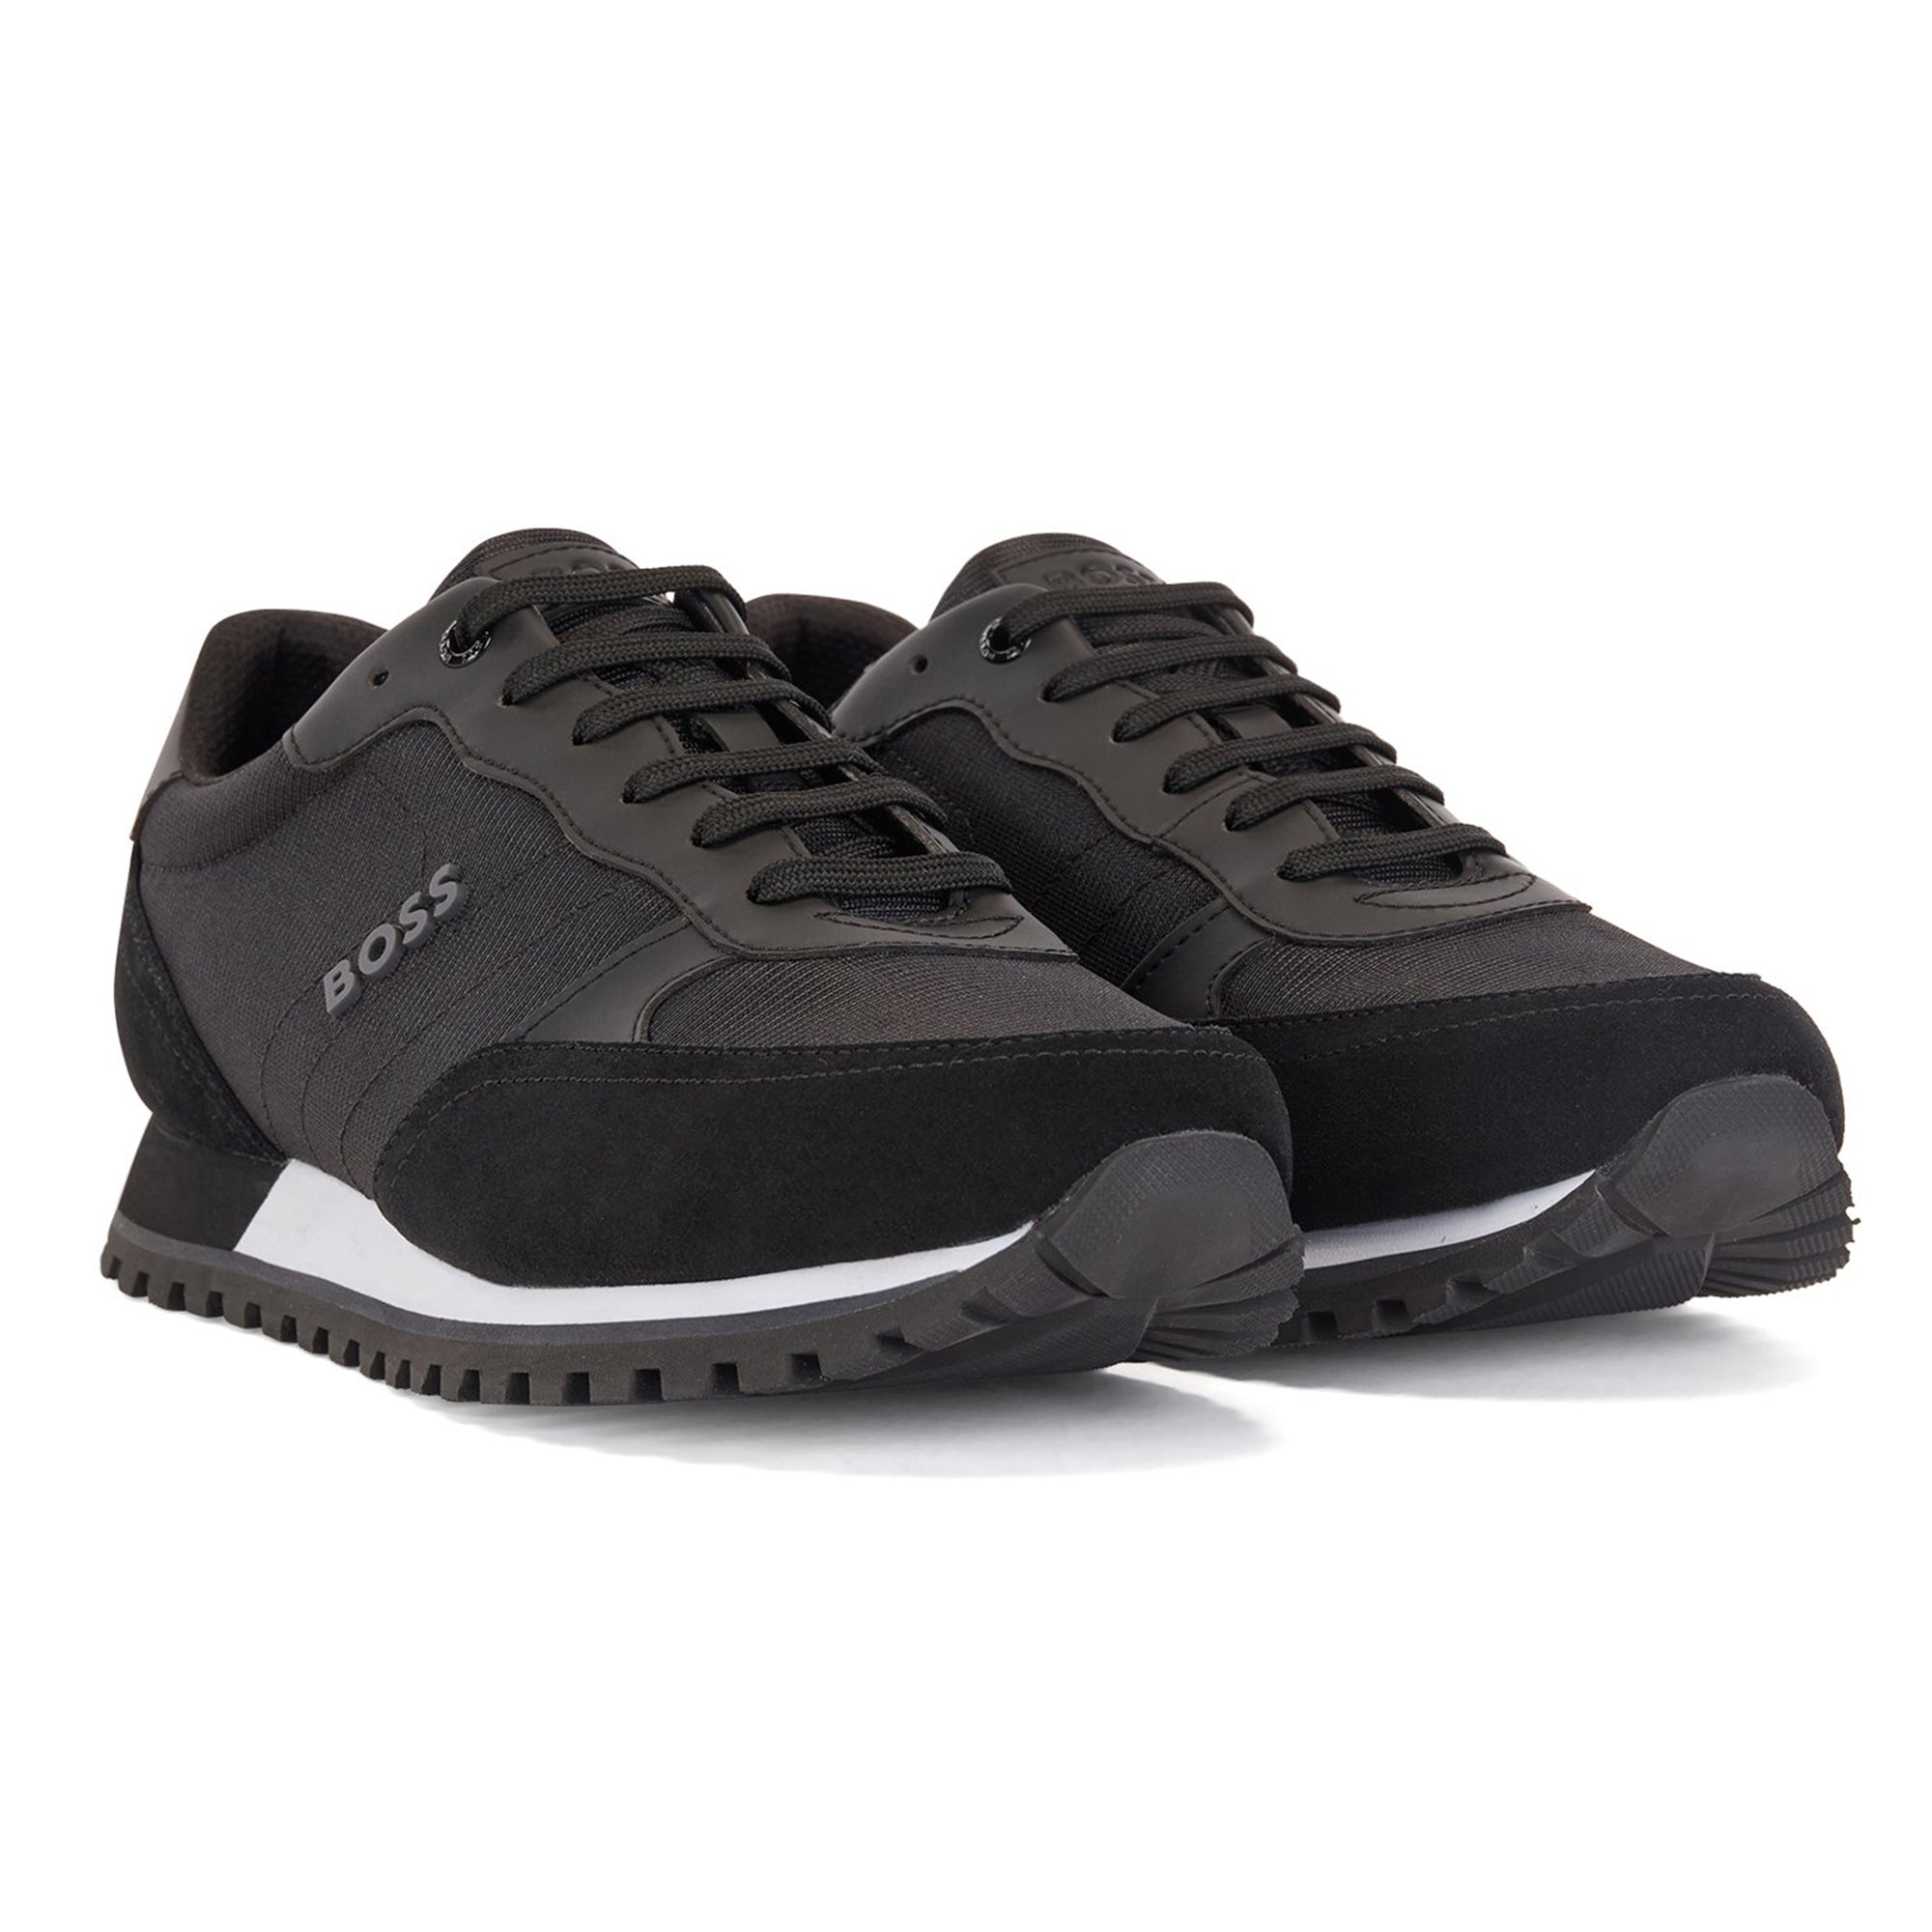 Boss Parkour-L Runner NYMX Trainers  - Black